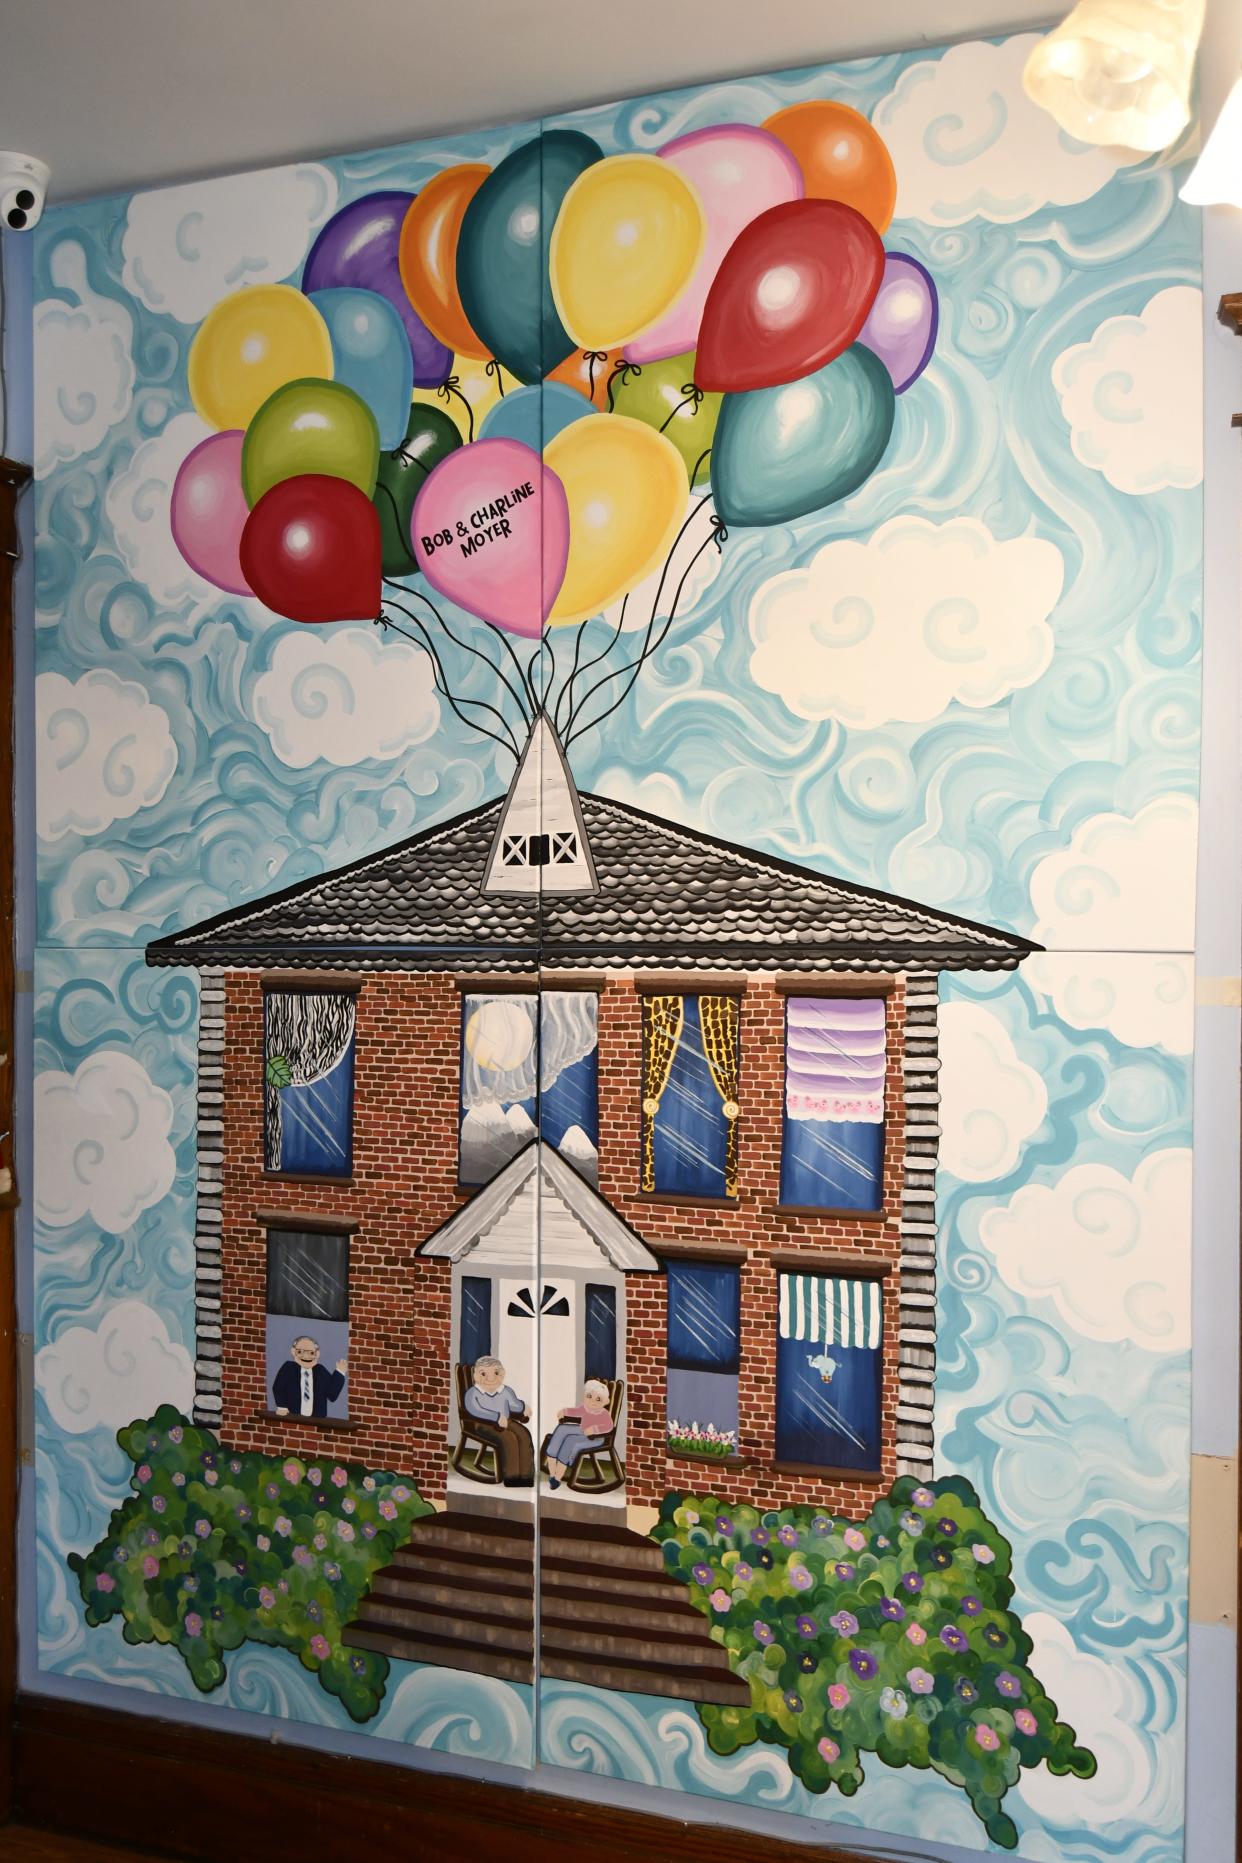 The mural in The Village House allows sponsors and donors to have their name painted on a balloon.